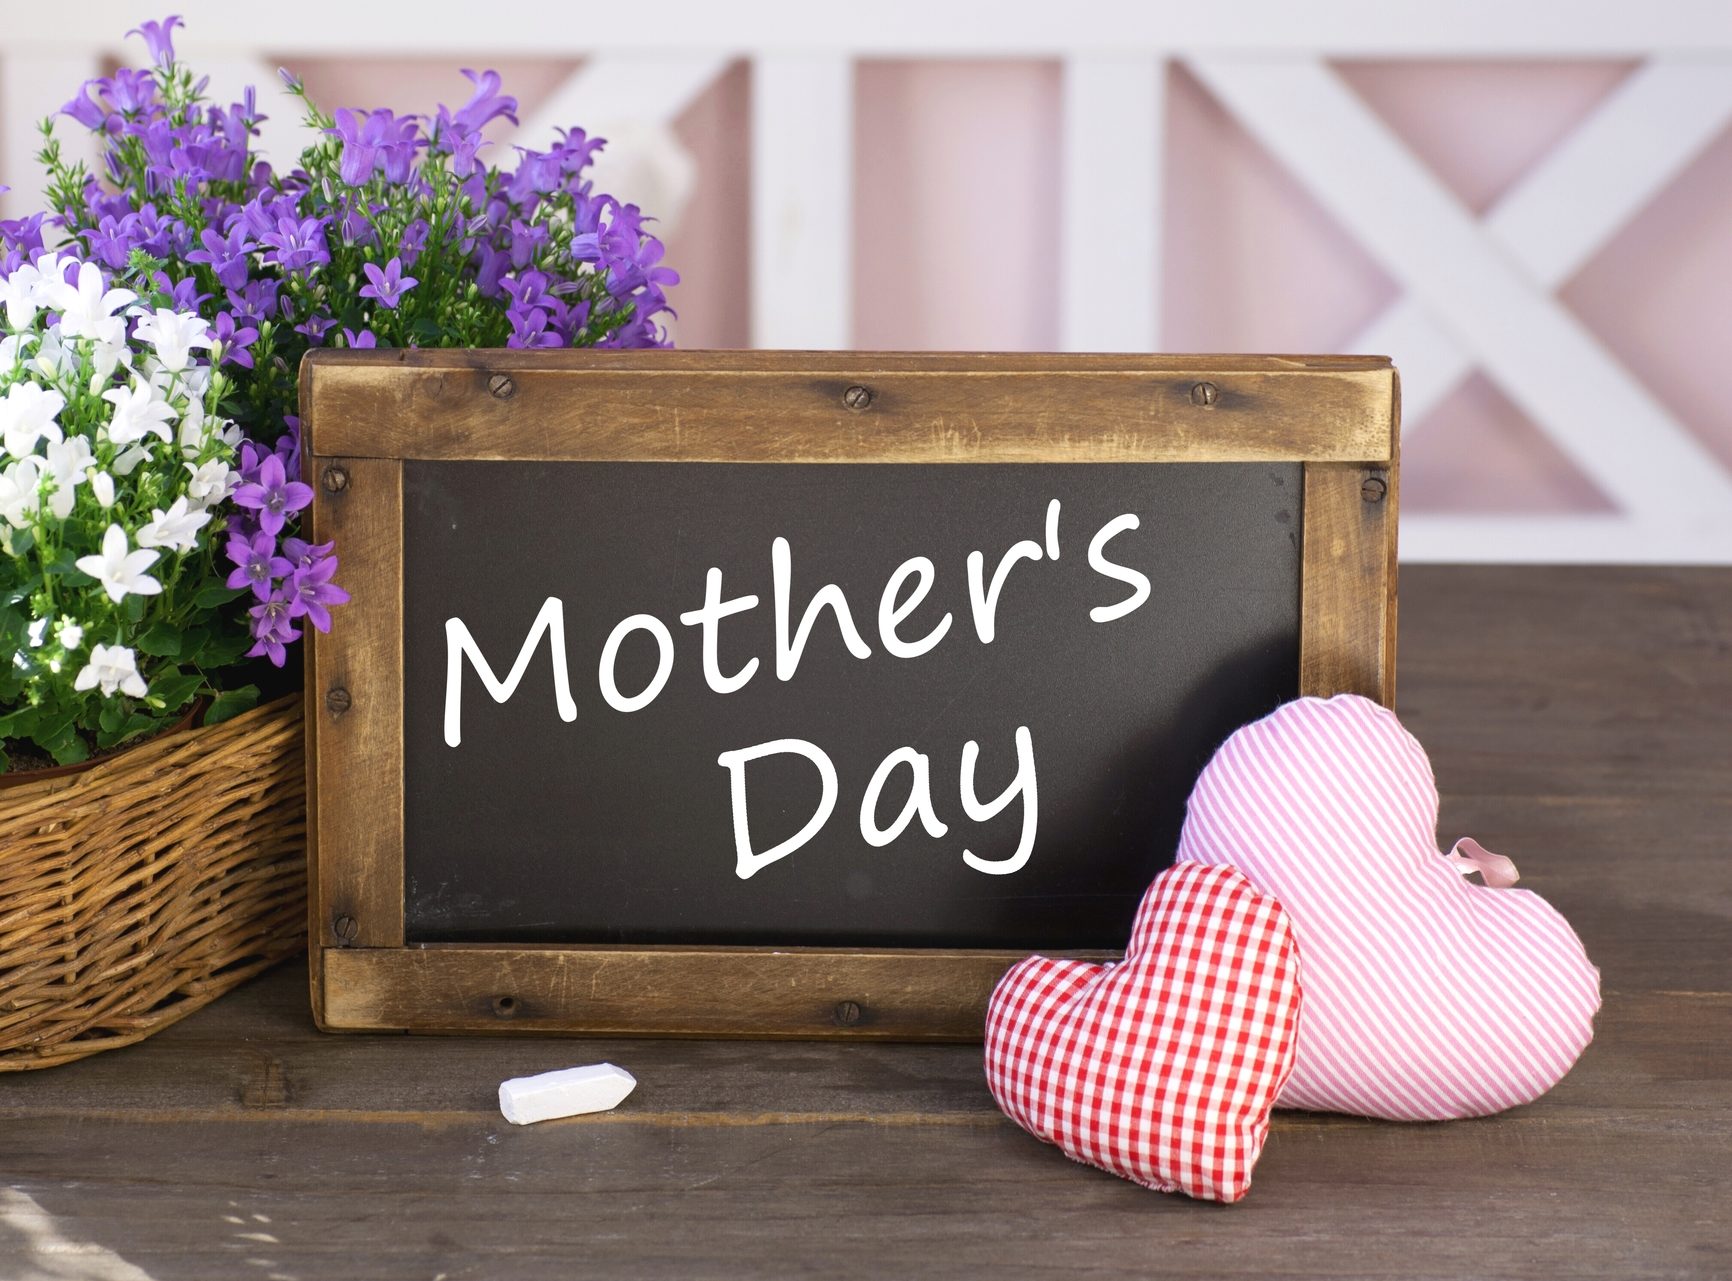 10 great Mother’s Day gift ideas under $10